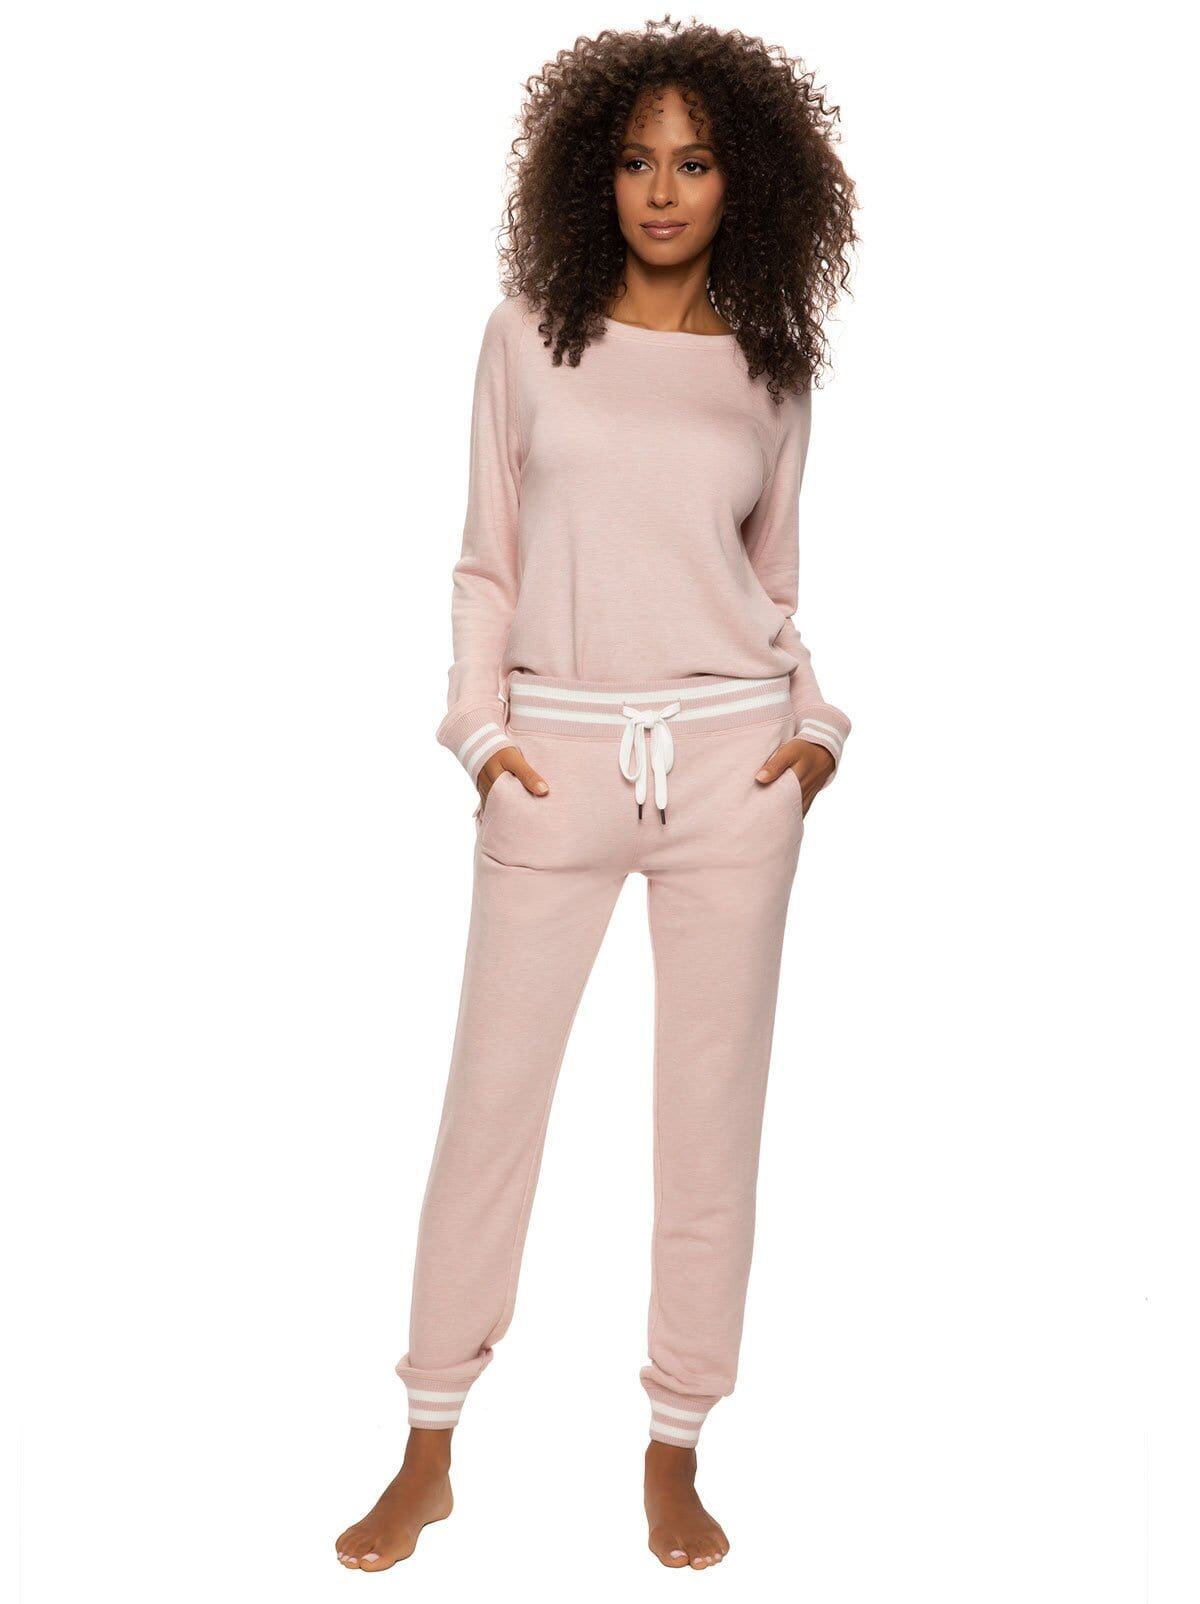 15 Best Jogger Sets for Women 2023 - Top Sweatsuits for Women